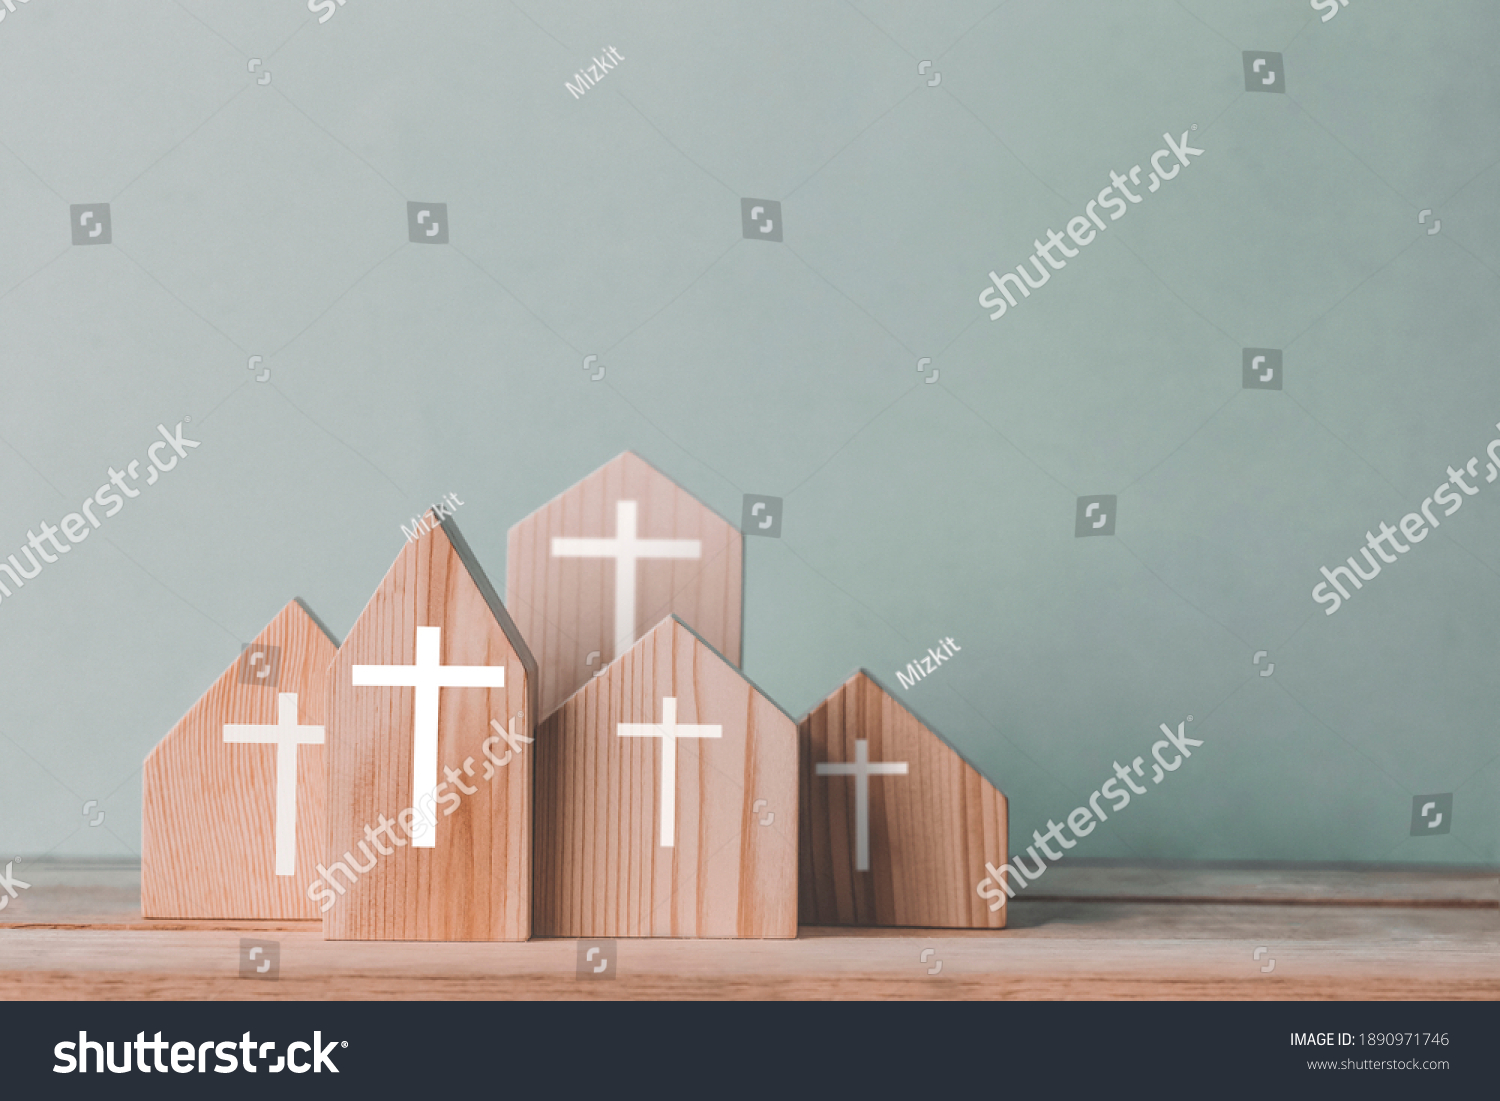 Village of church for catholics , community of Christ , Concept of hope , christianity  faith  religion and church online #1890971746